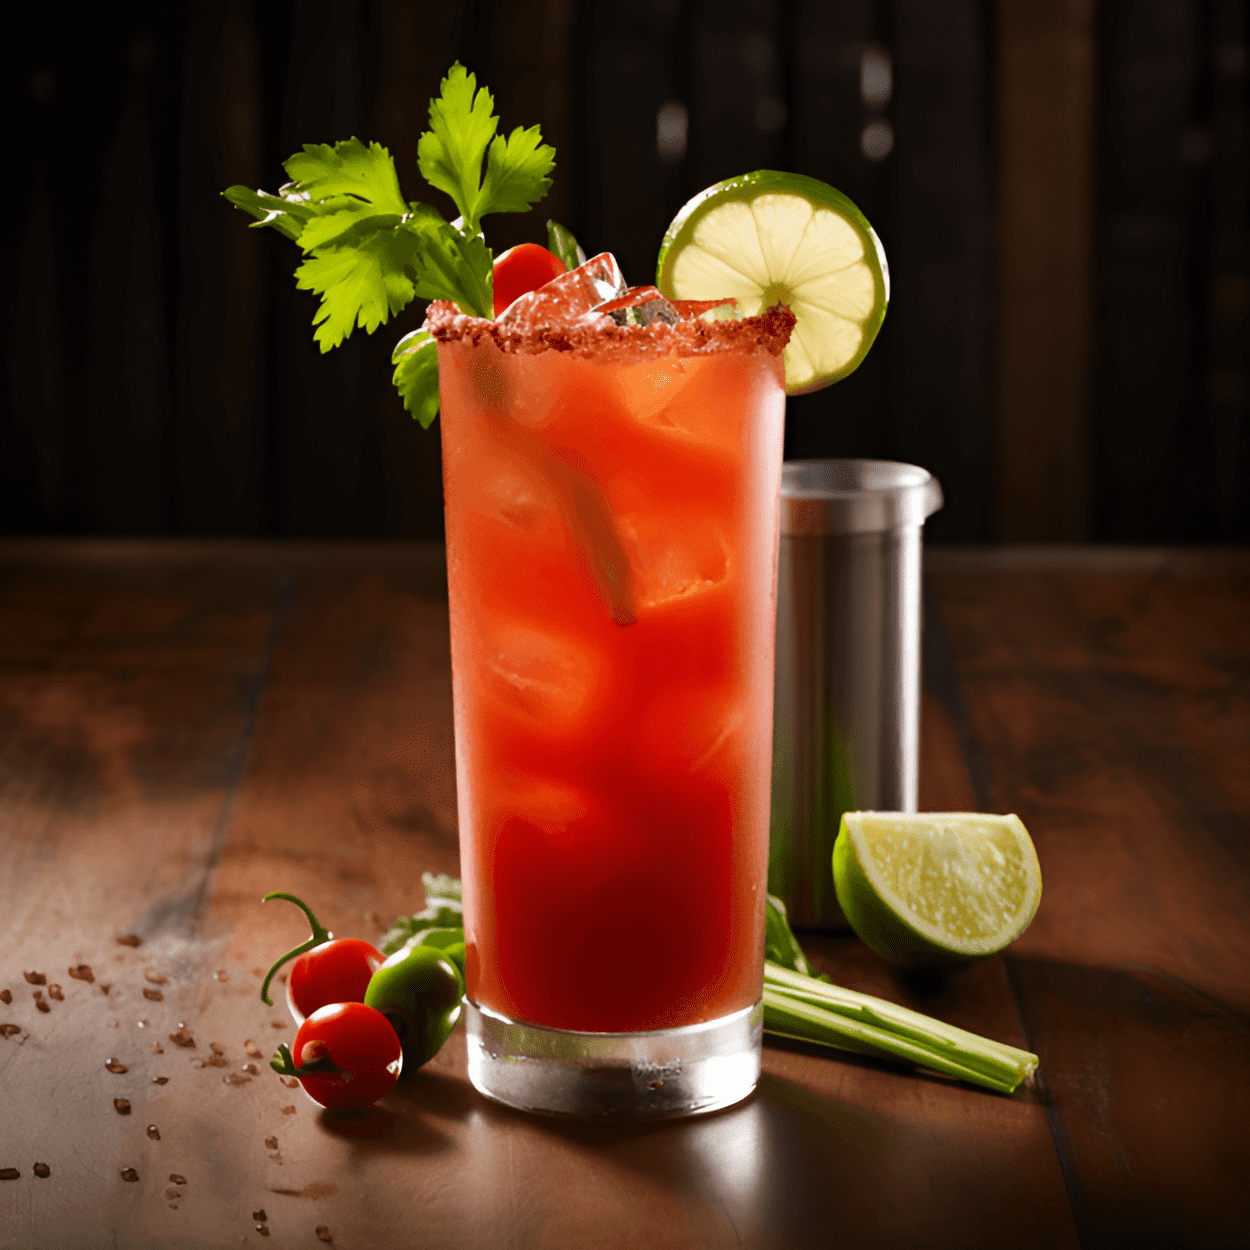 Bloody Bull Cocktail Recipe - The Bloody Bull is savory, tangy, and slightly spicy. The beef bouillon adds a rich, meaty flavor that's balanced by the acidity of the tomato juice and lemon. The vodka gives it a kick without overpowering the other flavors.